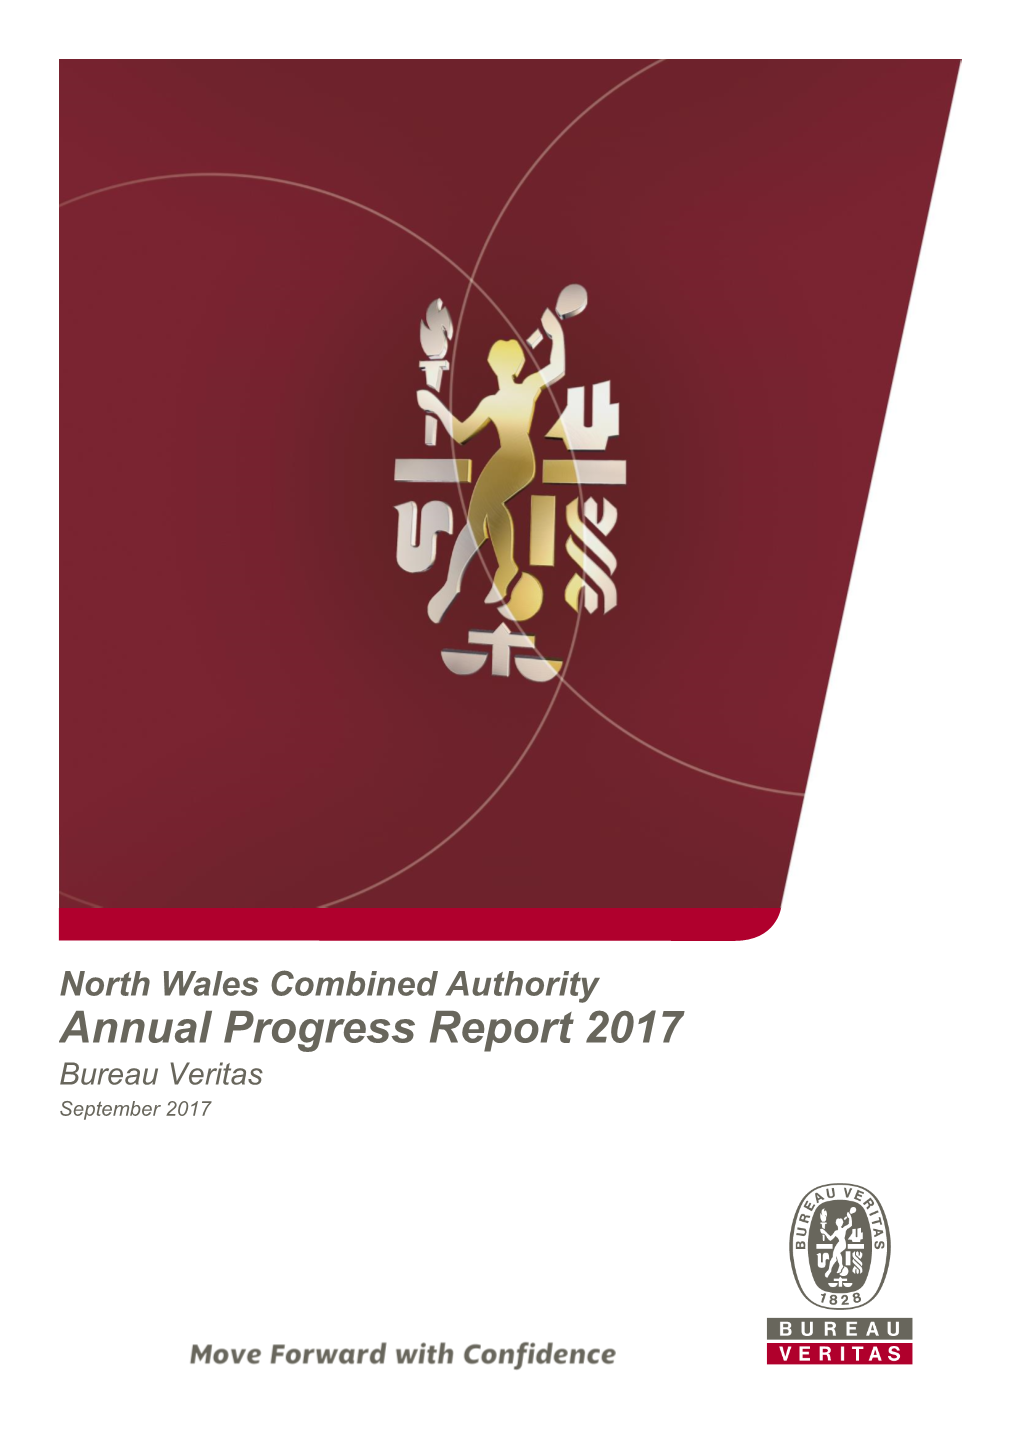 North Wales Combined Authority 2017 Air Quality Progress Report